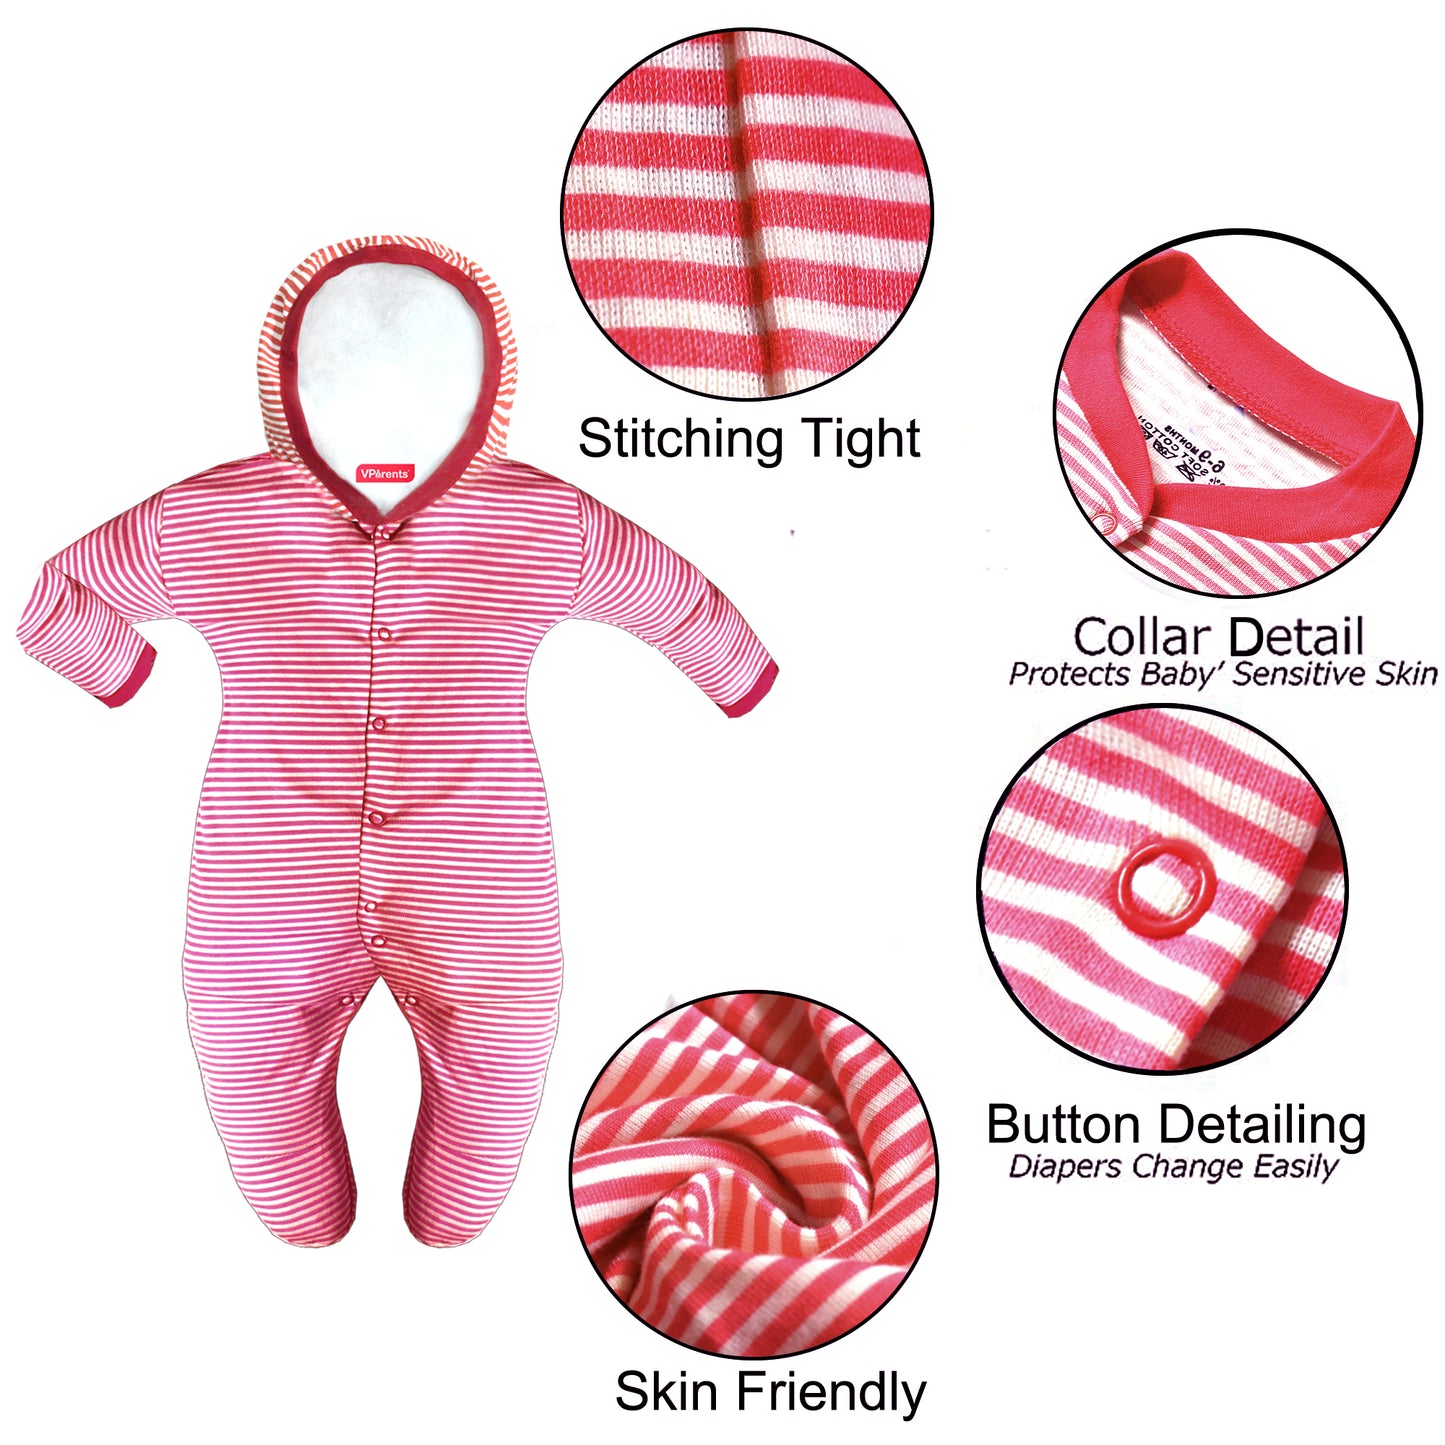 Zoey Red Hooded Full Sleeve Cotton Sleepsuit Rompers for boys & Girls (Pack of 2)